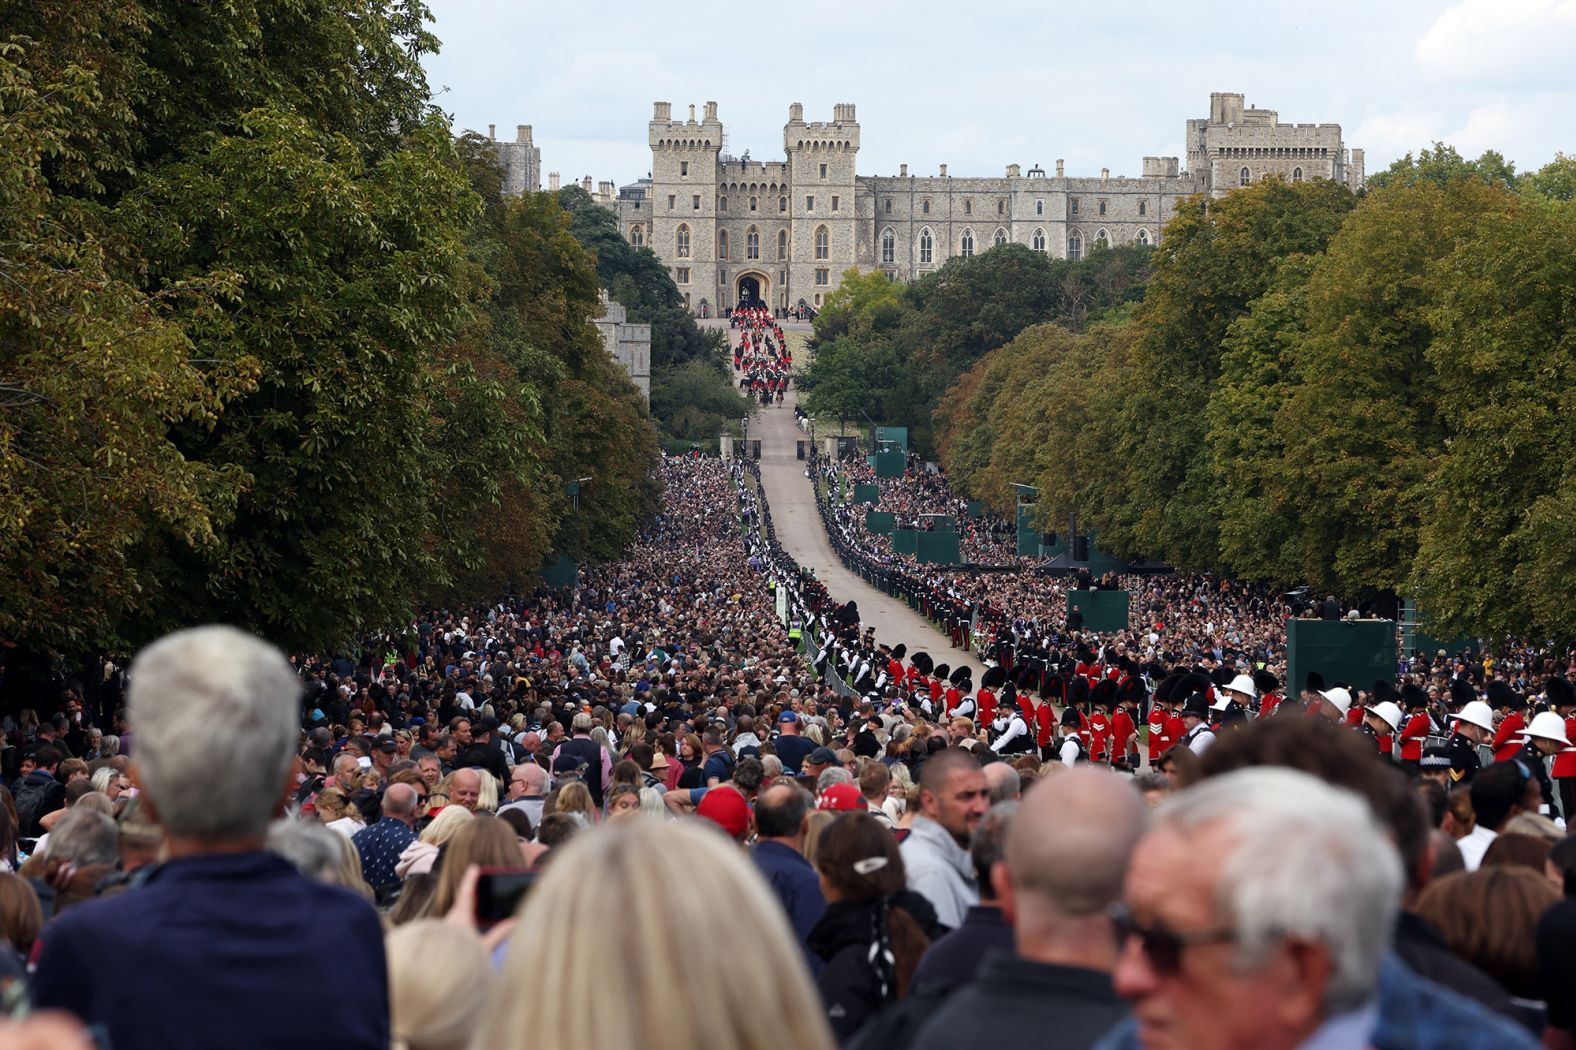 The hearse carrying the Queen's coffin enters the Windsor Castle grounds.